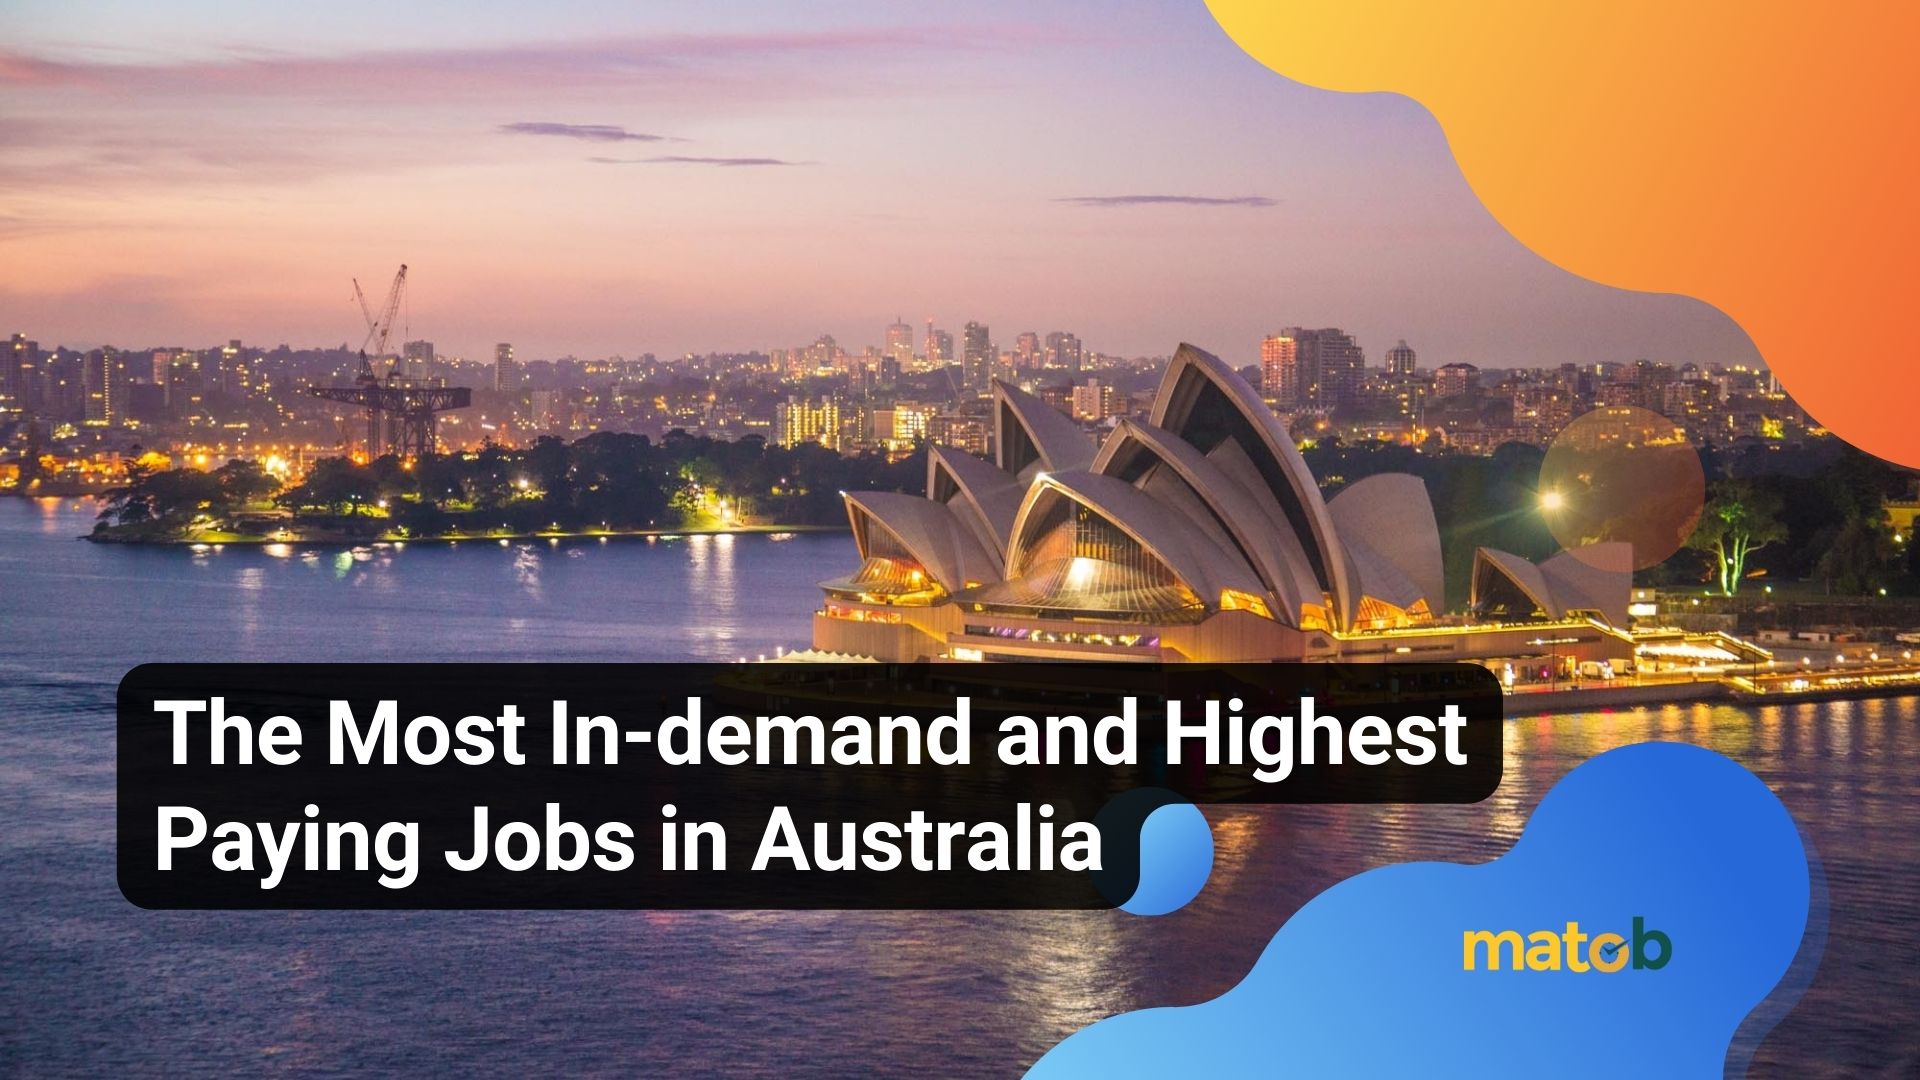 The Most In-demand and Highest Paying Jobs in Australia